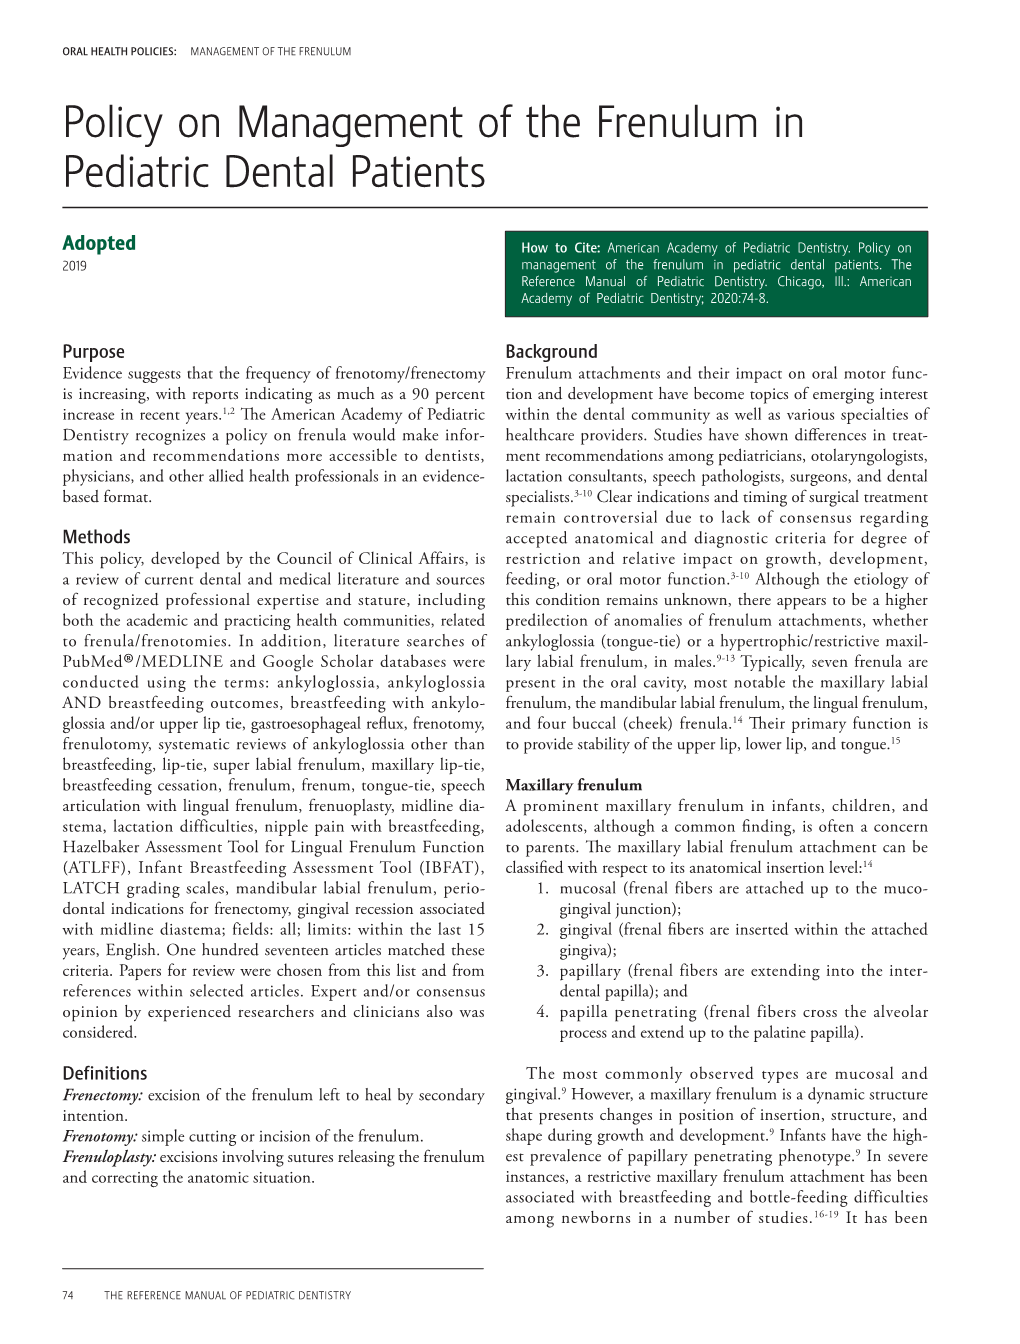 Policy on Management of the Frenulum in Pediatric Dental Patients